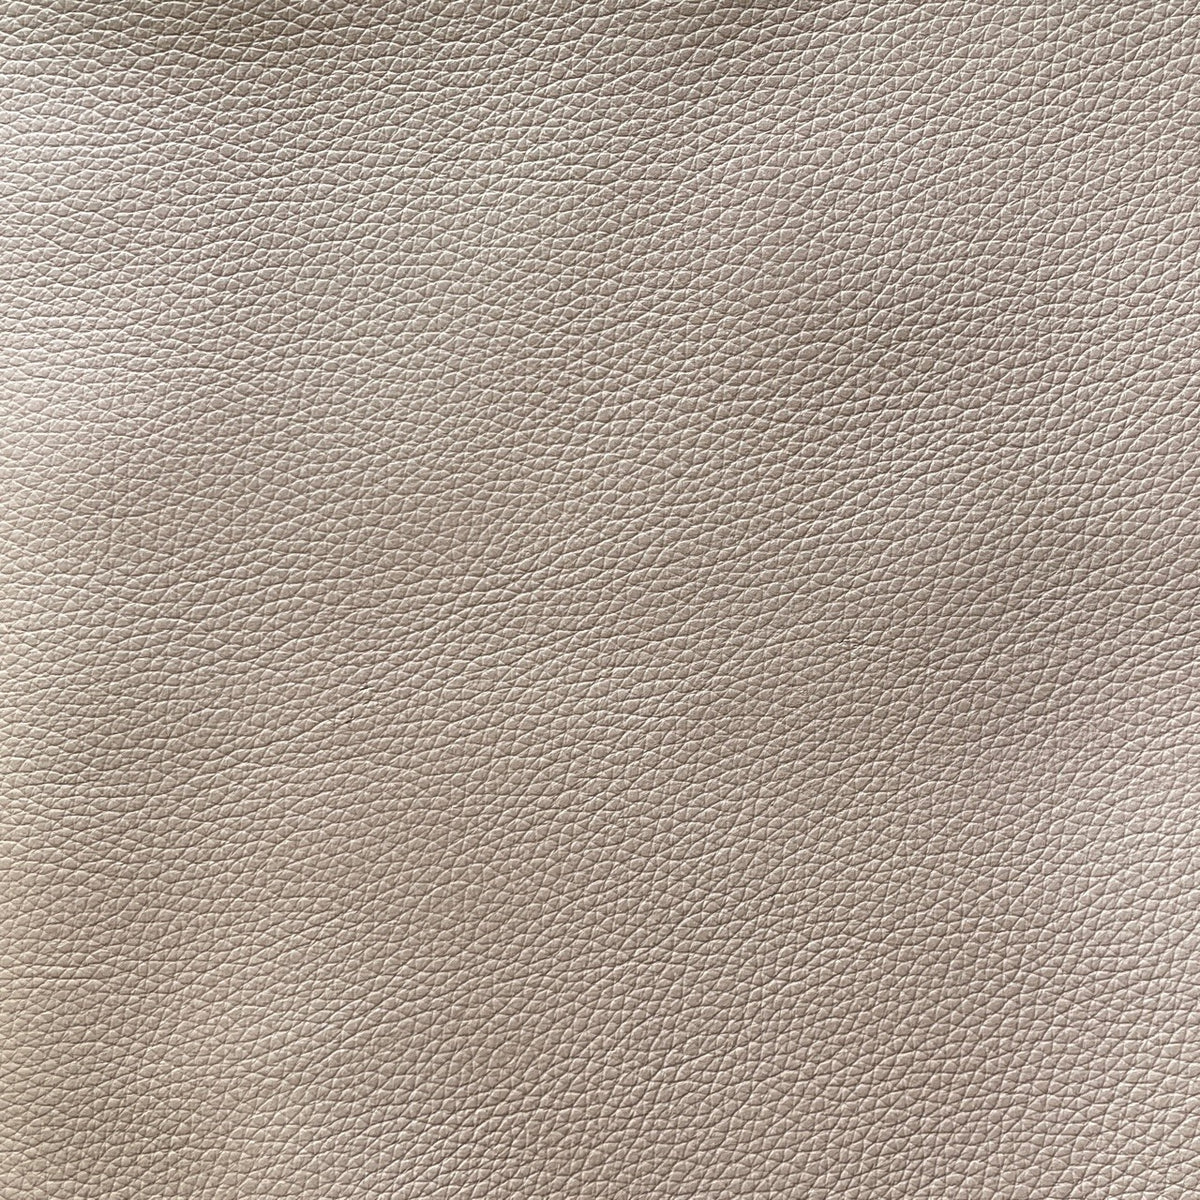 Upholstery Cow Hide #20 | Linen | 1.0/1.2mm | 50 sq.ft | From $420 ea.